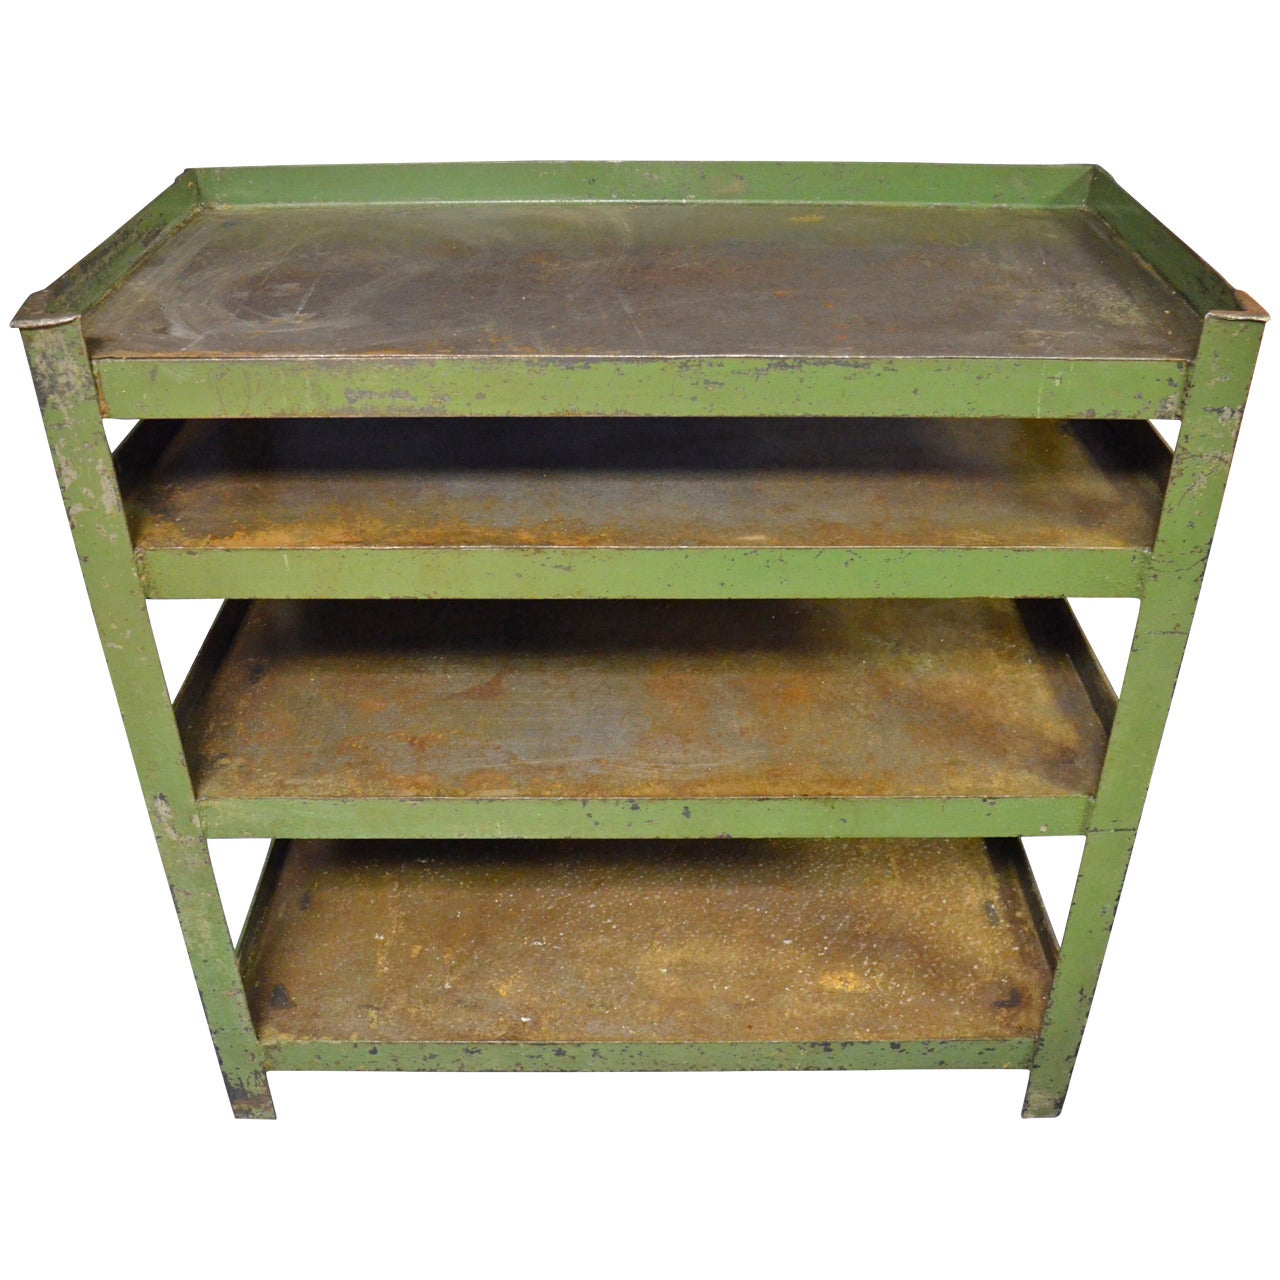 Industrial Steel Cart with Four Shelves